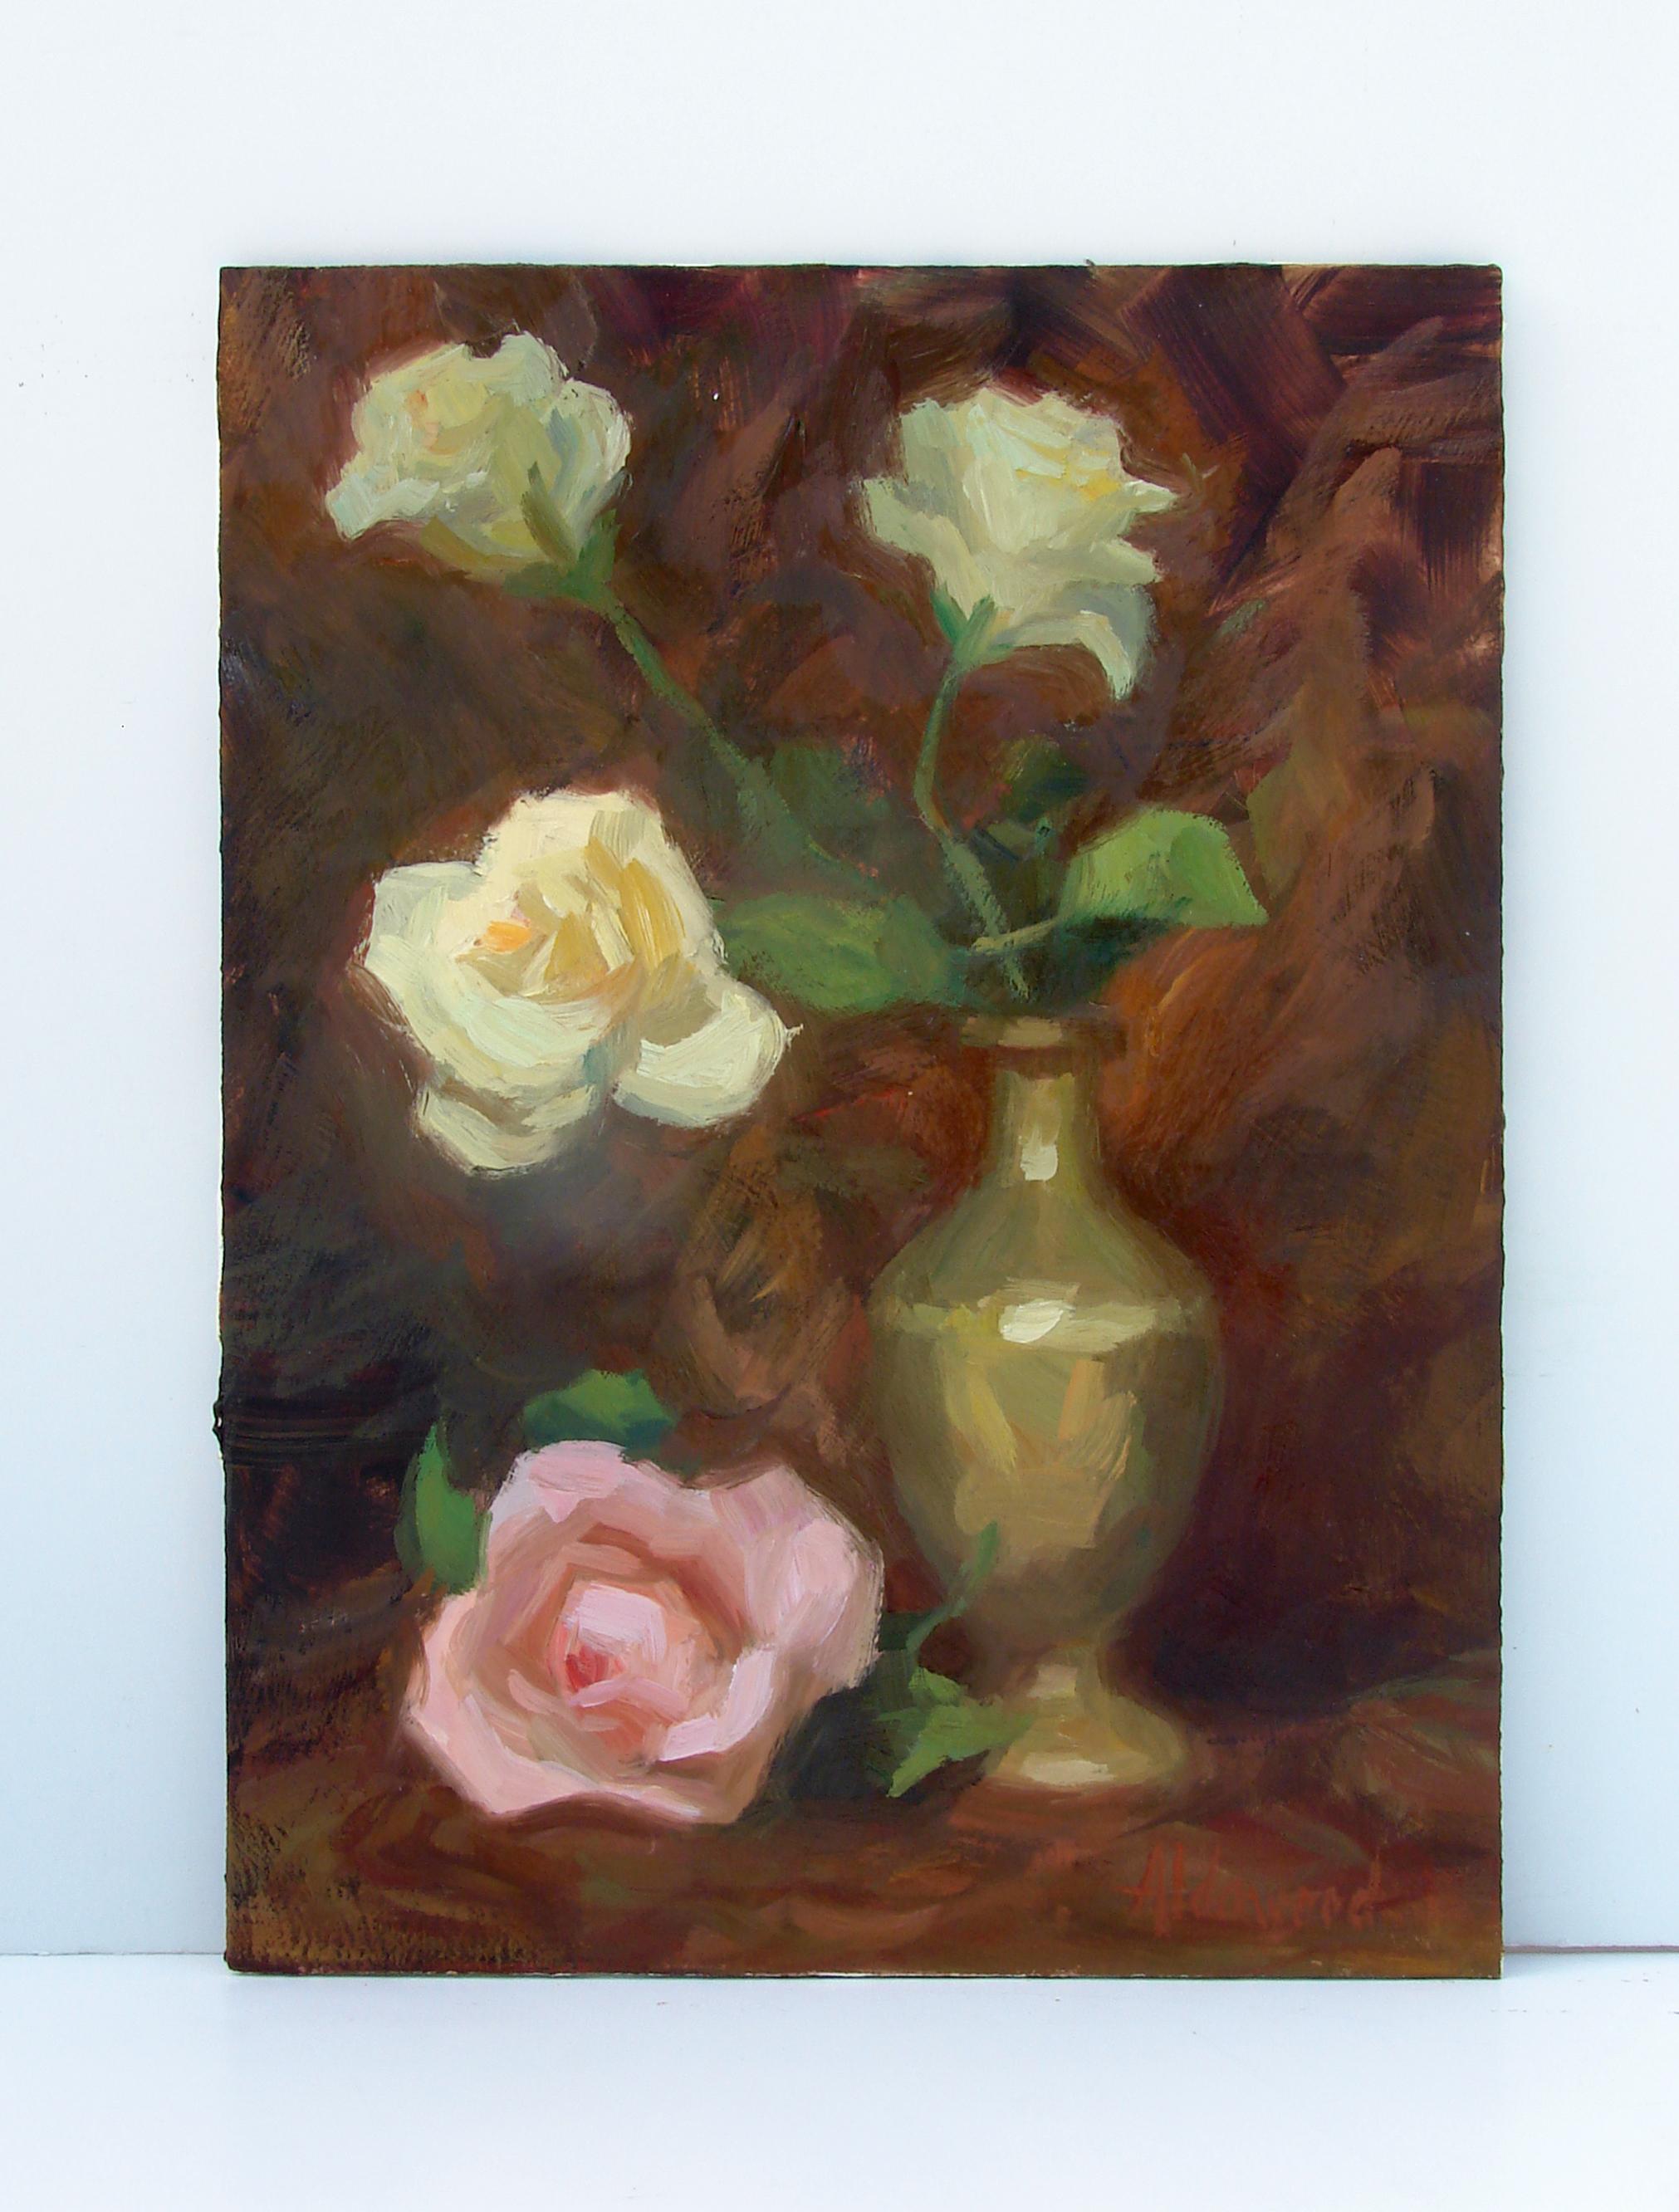 <p>Artist Comments<br>This still-life painting depicts white roses arranged in a brass vase, with a pink one at the bottom. The earth-toned palette and thick bravura brushstrokes impart a timeless aura to the piece. Against the brown background, the